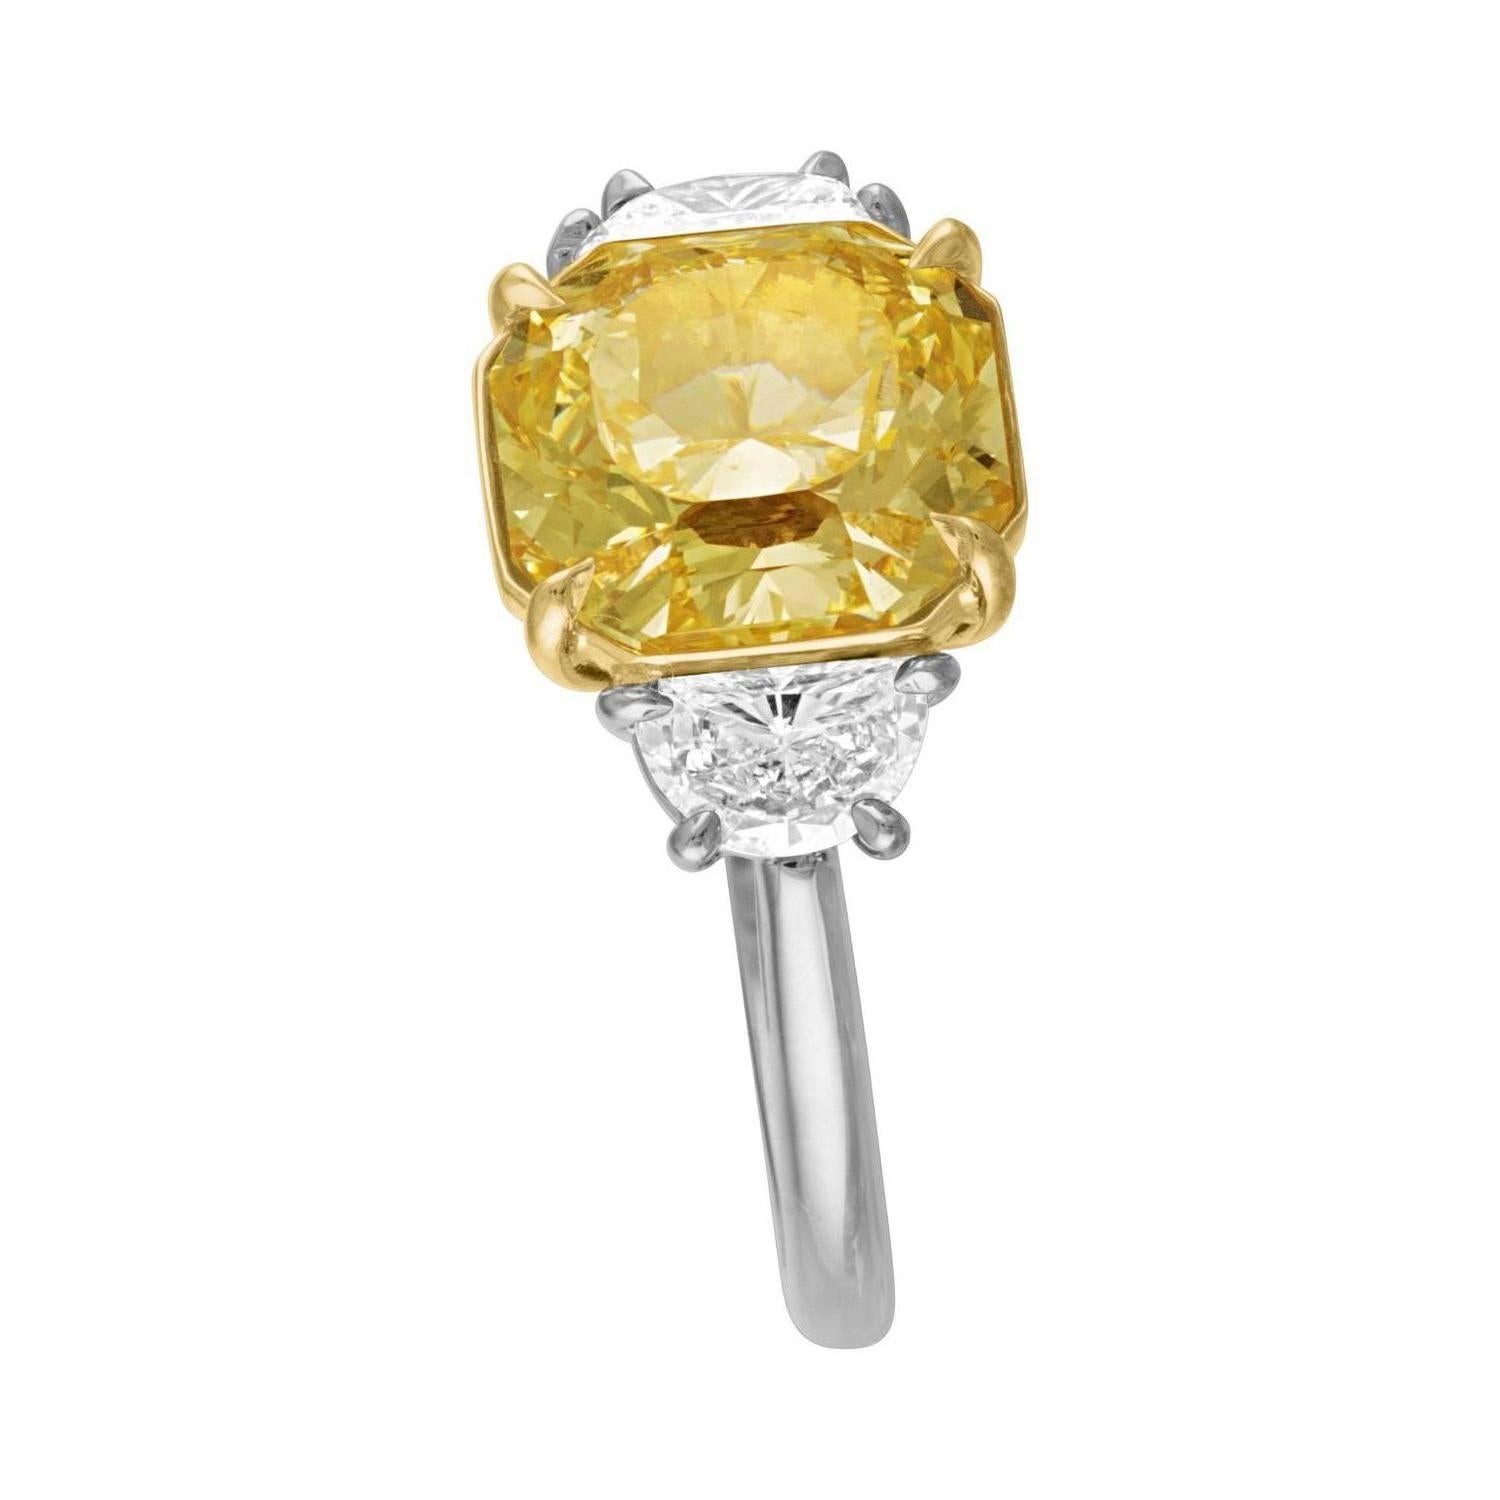 4.09 Carat Cushion Certified by the GIA as Fancy Yellow in Color and VS1 in Clarity.
GIA Certificate Number is 2173803488.
The Cushion is set in Two Tone Mounting, 18K Yellow Gold and Platinum. To the side of the 4.09 Carat Cushion Cut there are Two